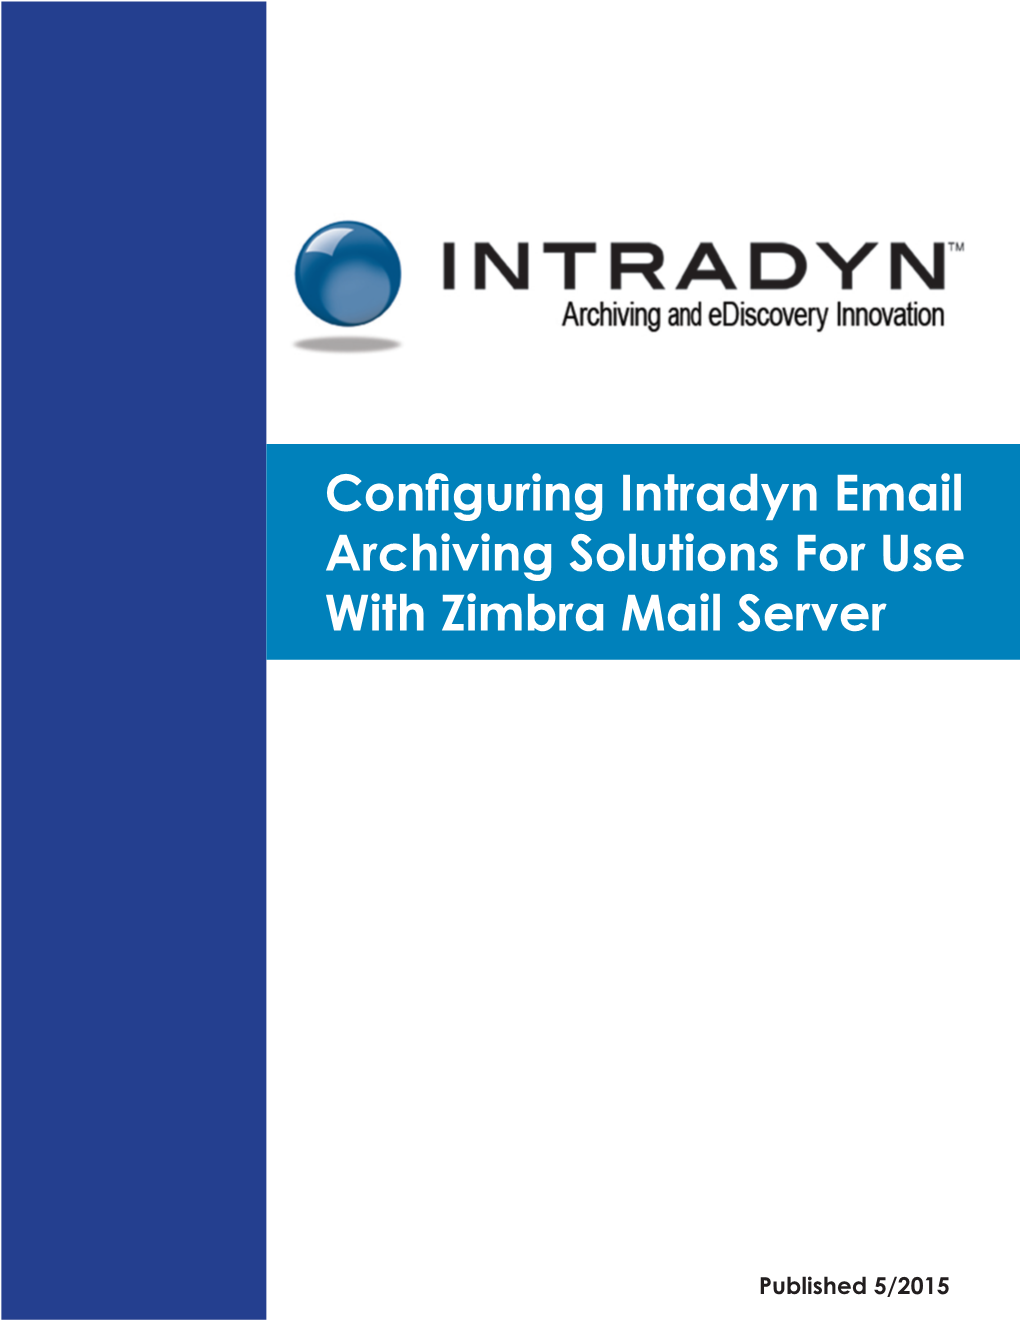 Configuring Intradyn Email Archiving Solutions for Use with Zimbra Mail Server